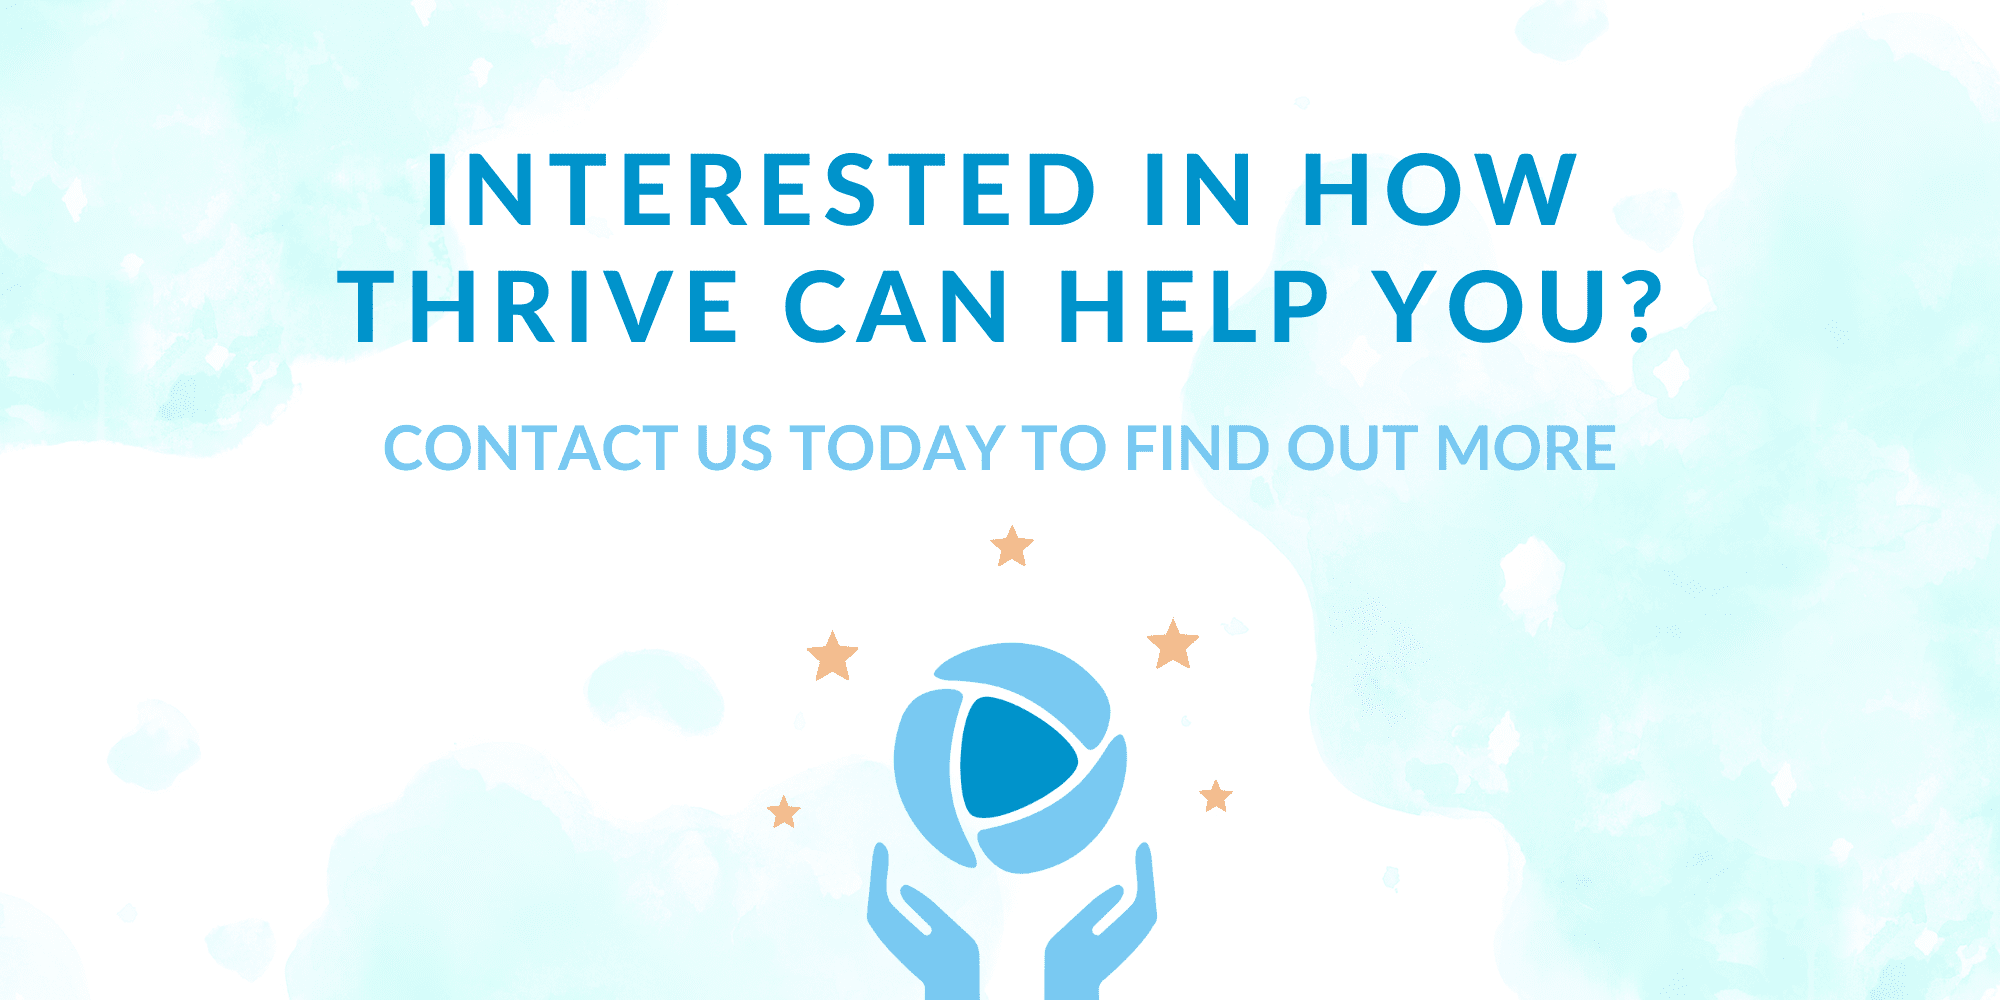 How can Thrive help you? Click here to contact us today to find out more